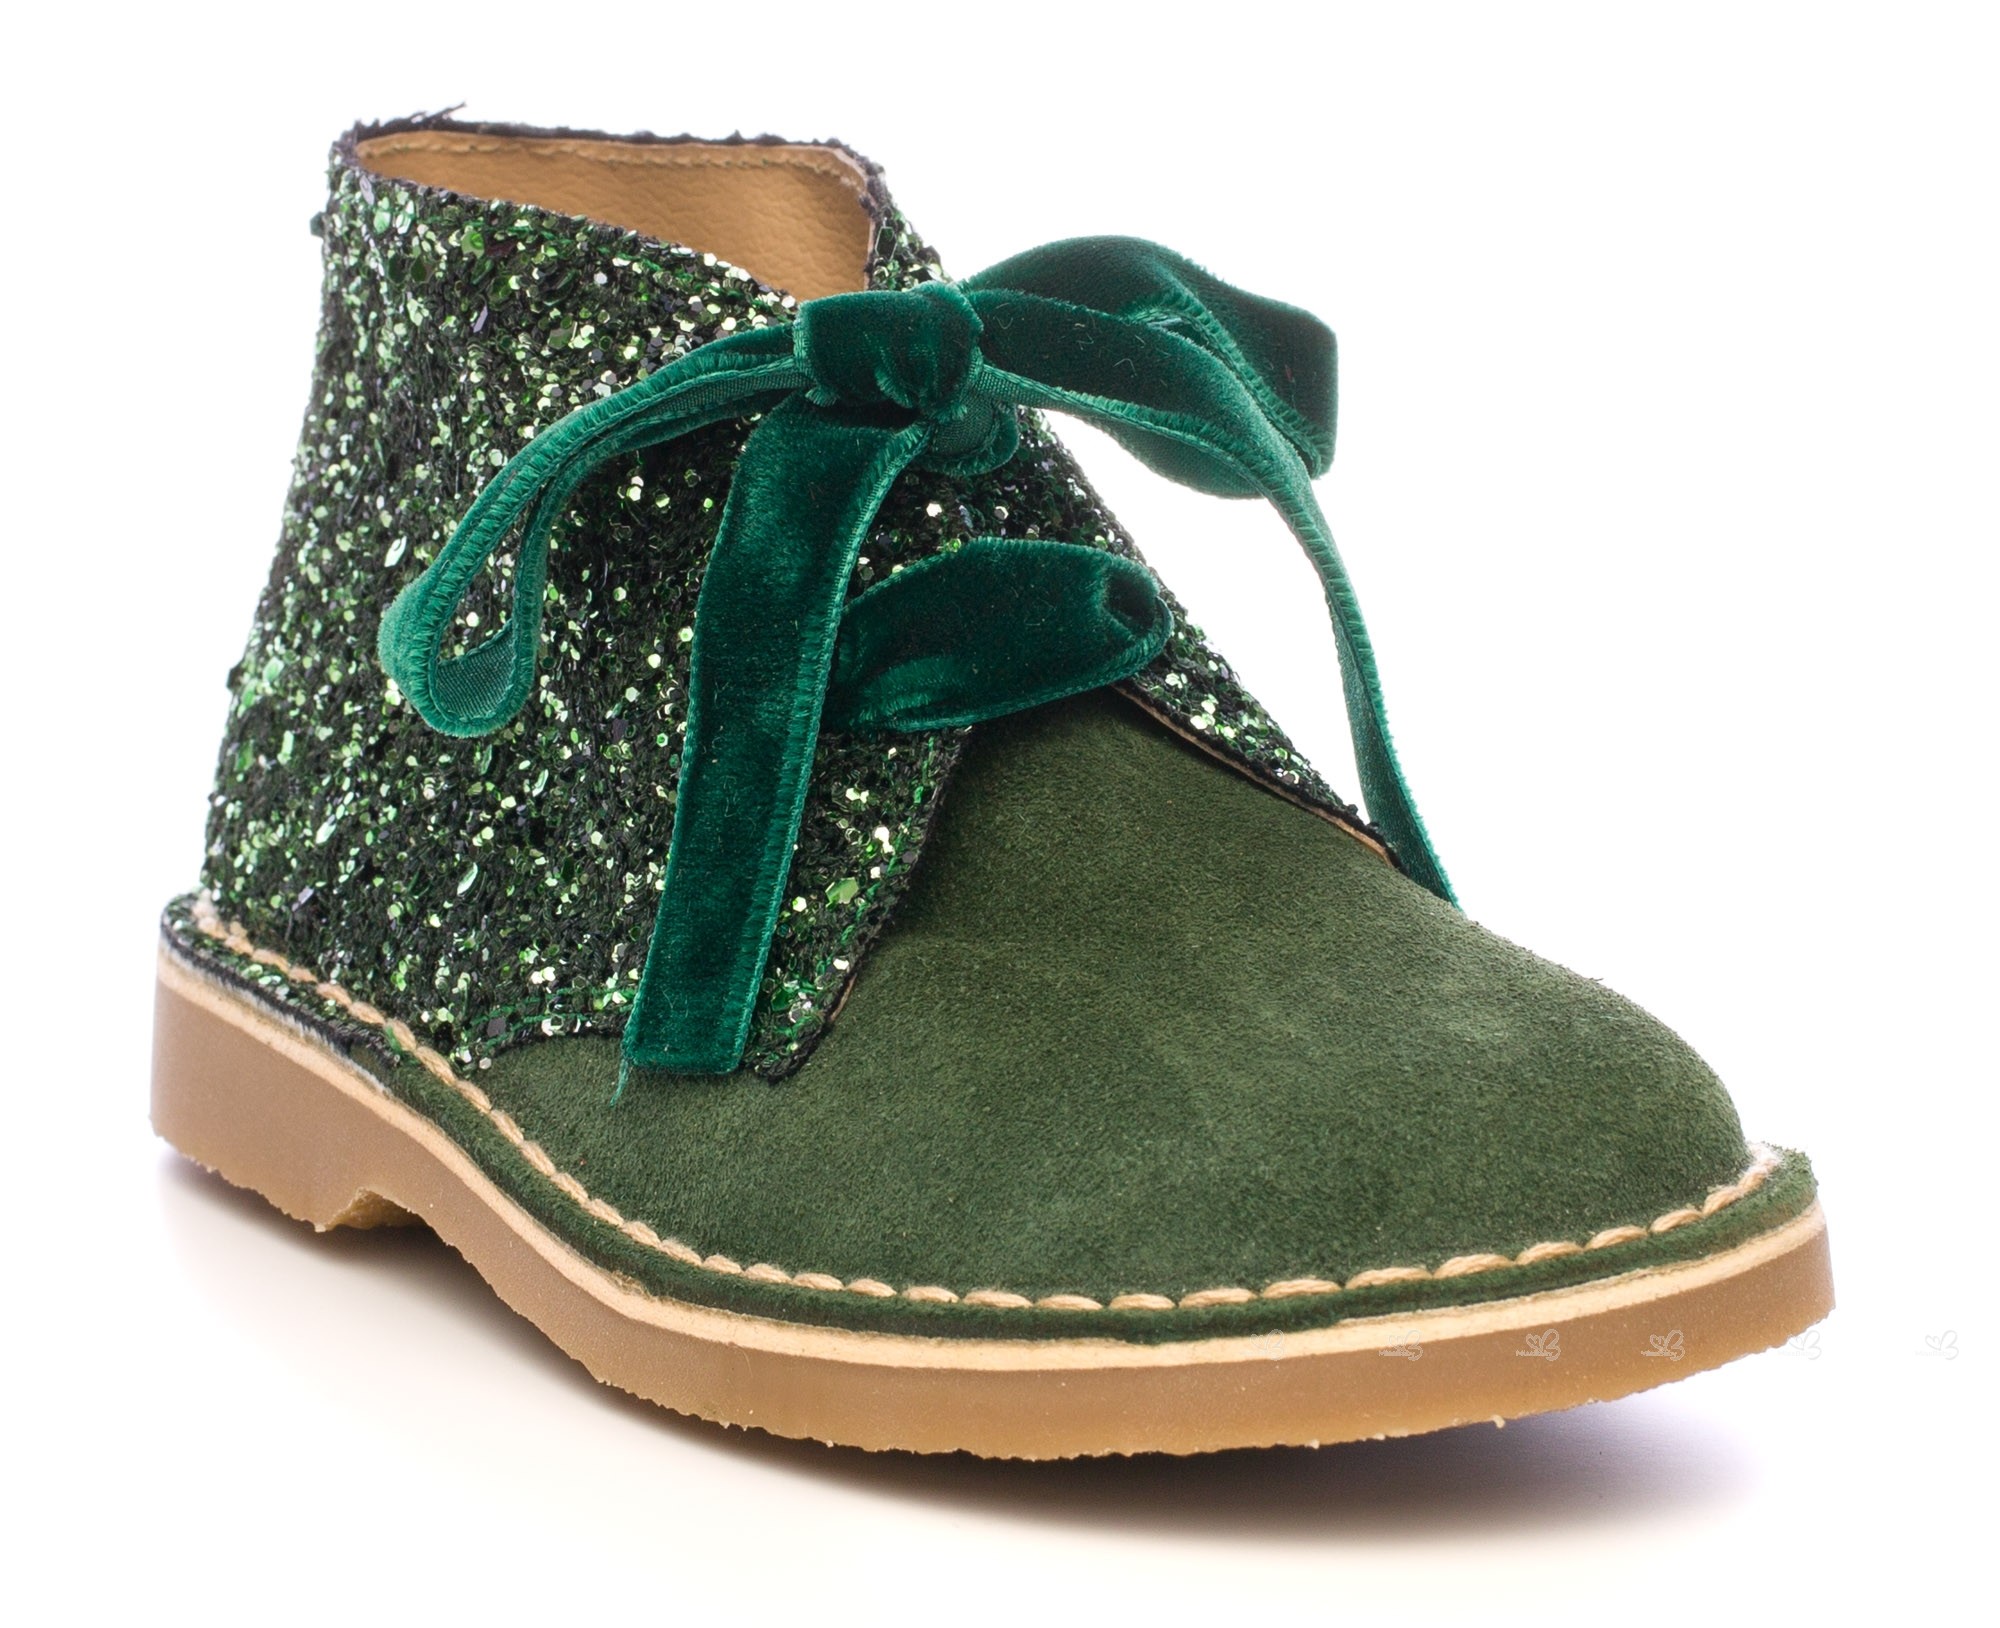 Rochy Girls Green Suede & Glitter Boots with Velvet Bows